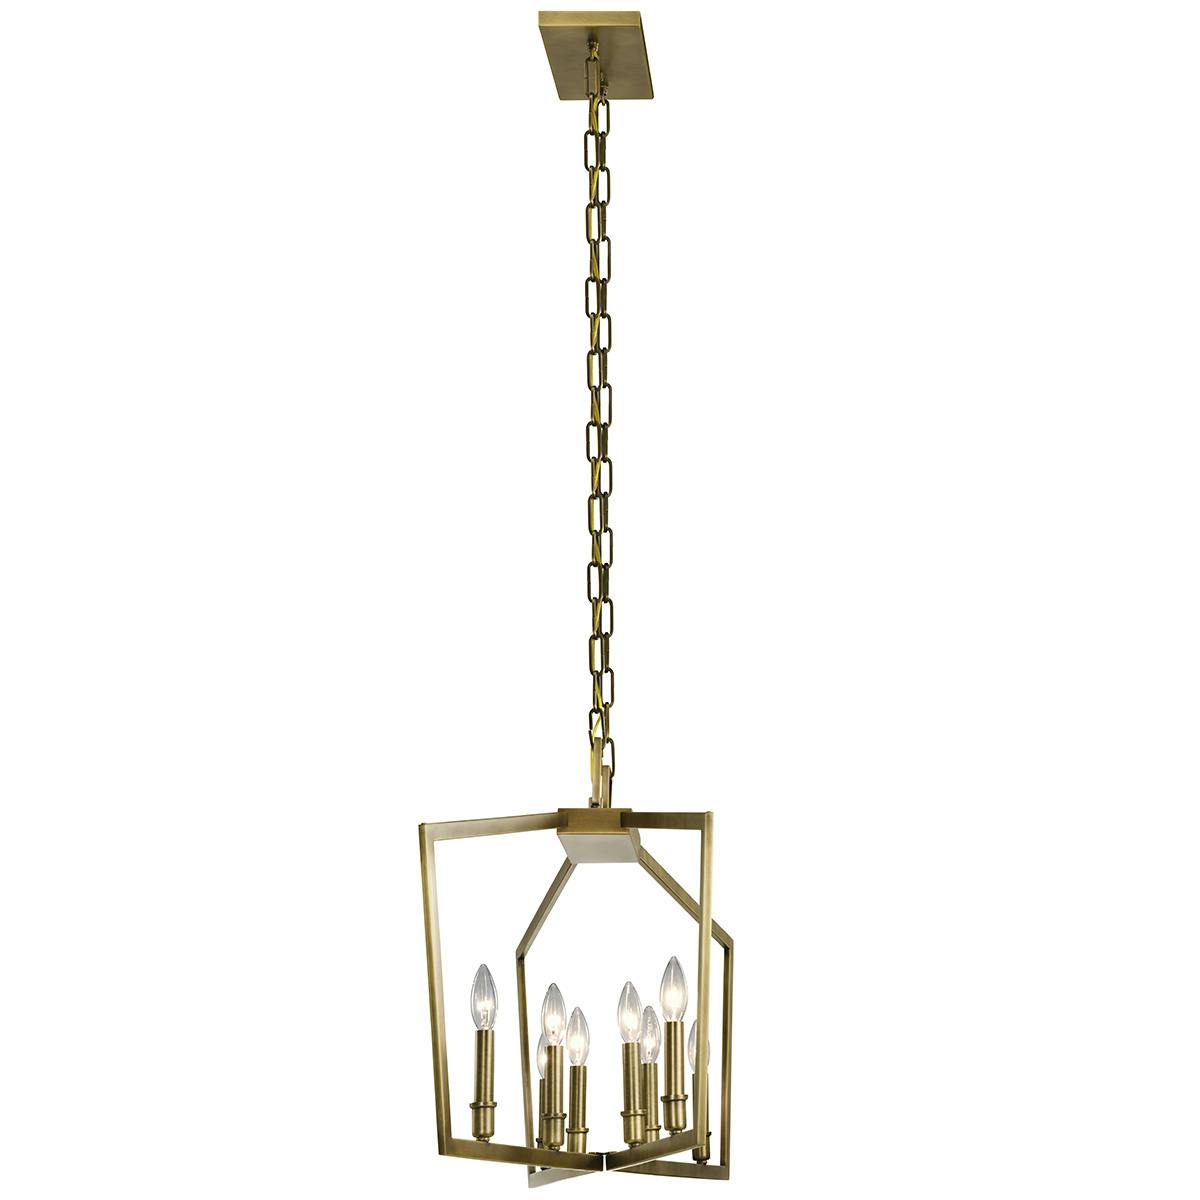 Profile view of the Abbotswell 42" Linear Chandelier Brass on a white background